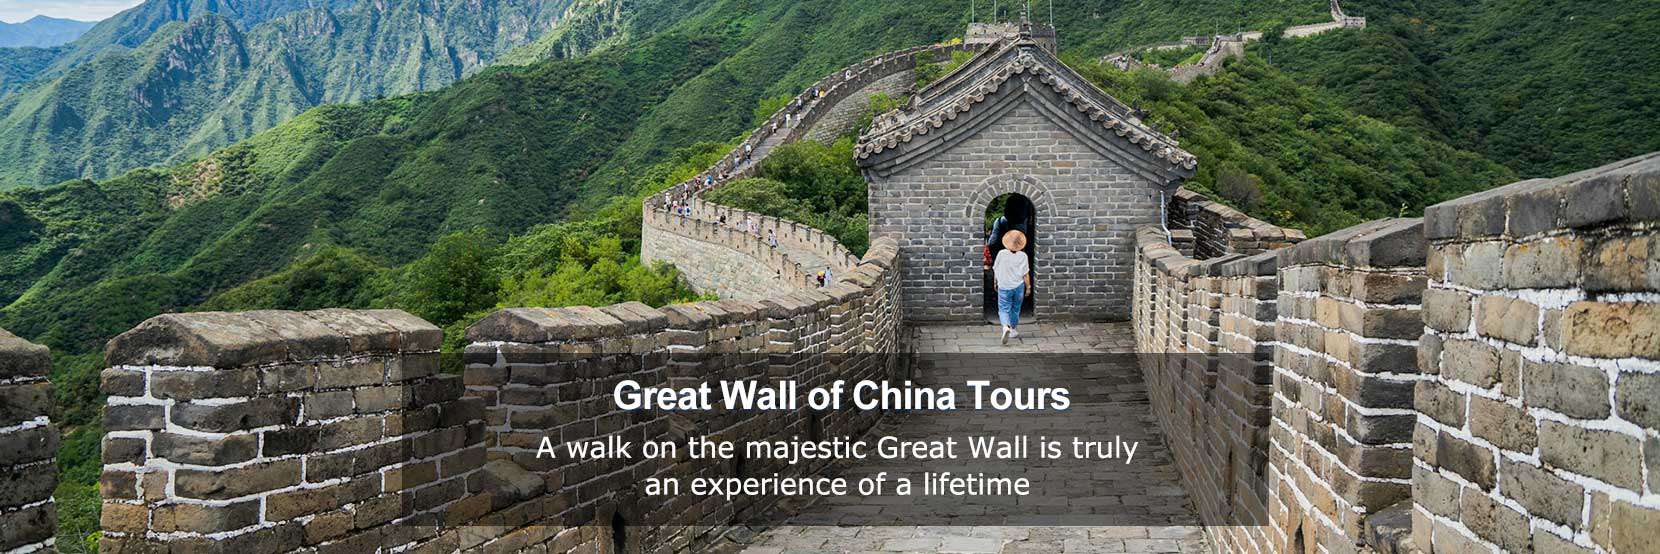 The Great Wall of China Tours